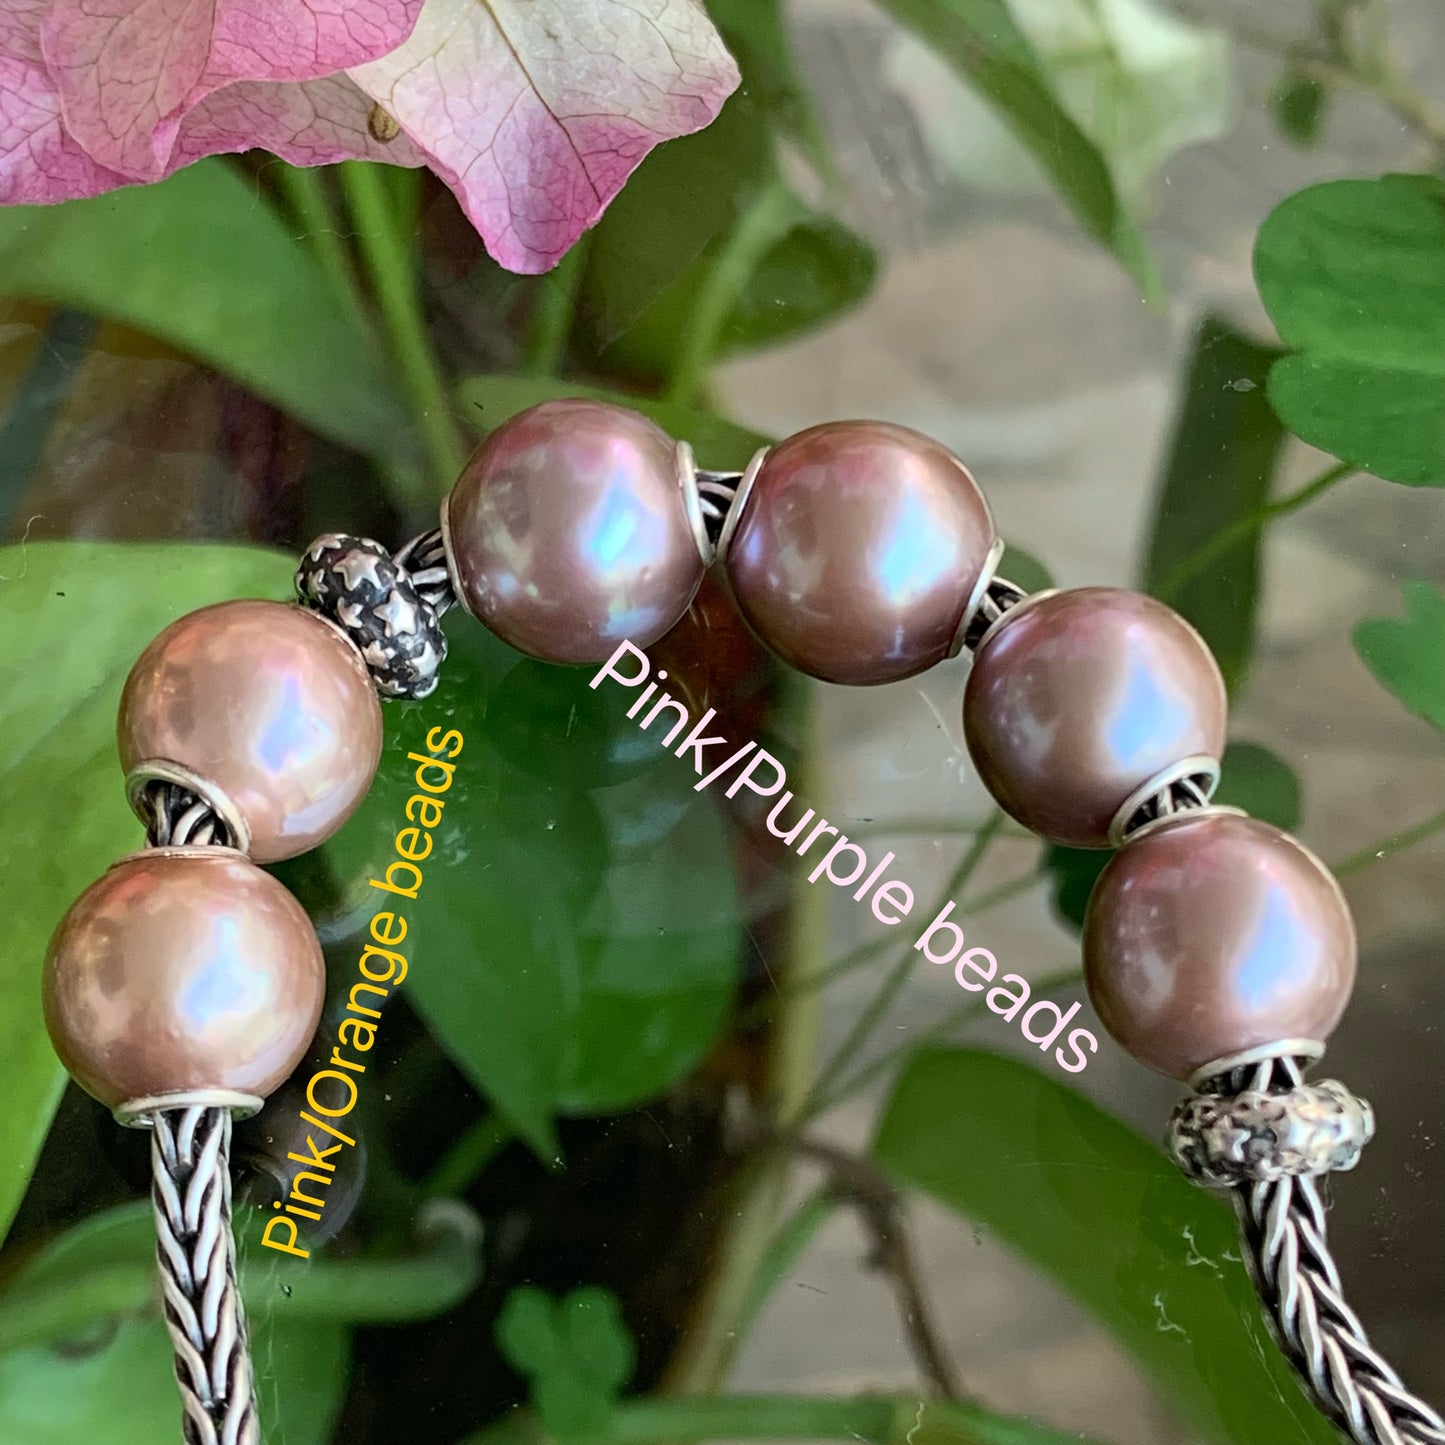 Purple Gold Rosegold lilac Freshwater Pearl Beads with Small Core for European Trollbeads Bracelets or Pandora Bangles